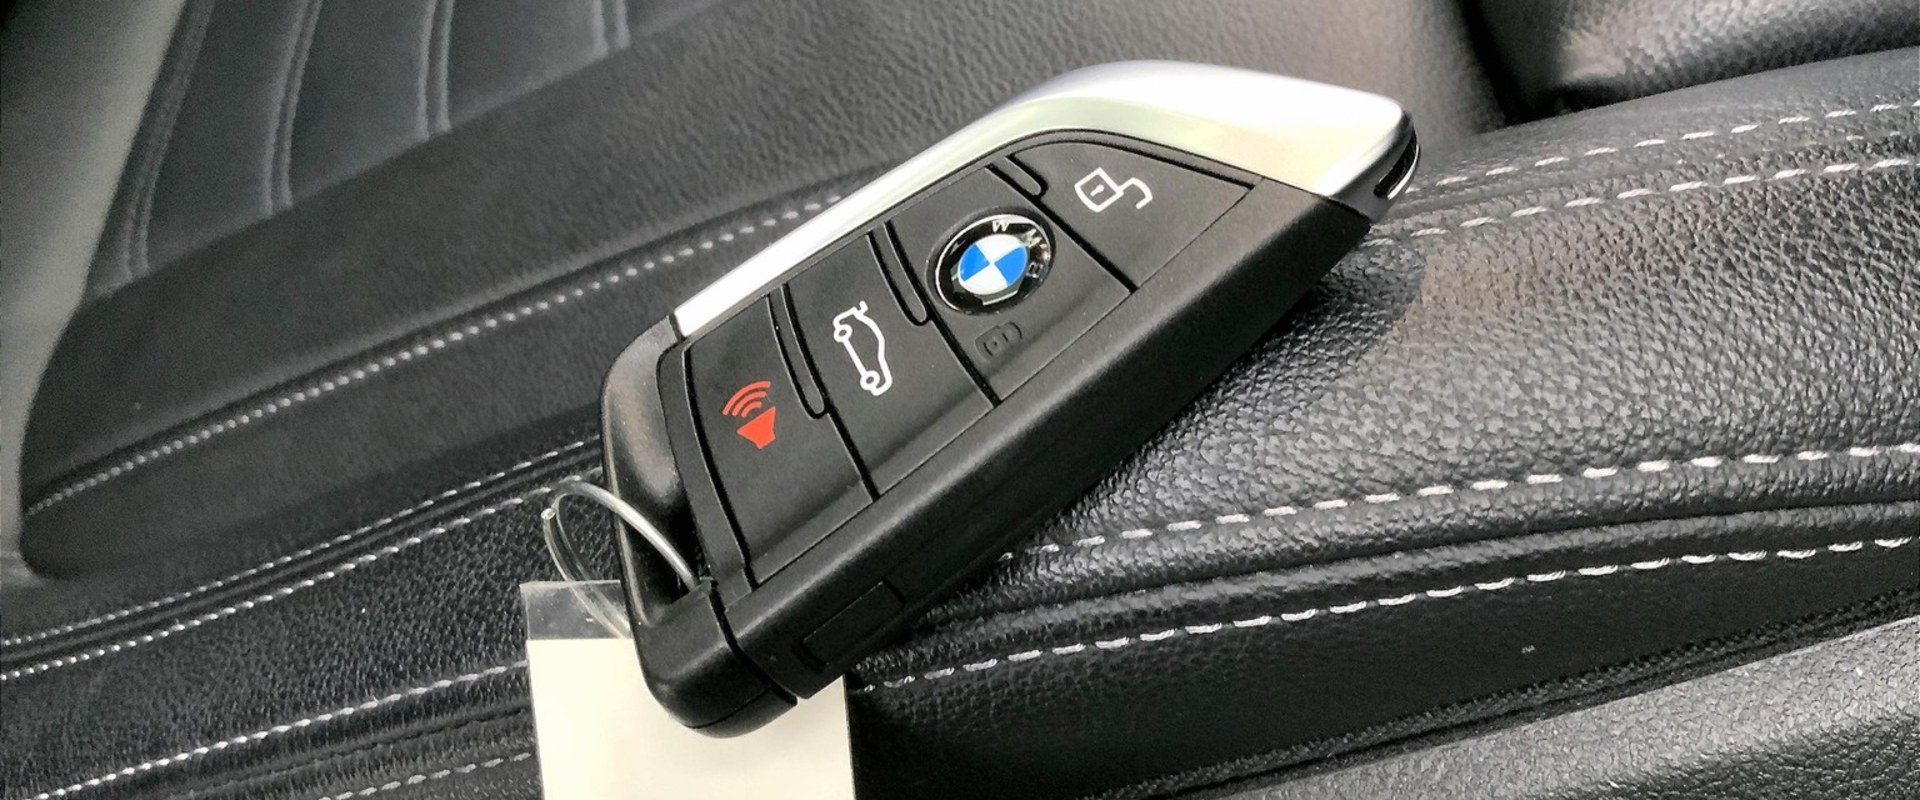 Military Discounts for Car Key Replacement in Spokane